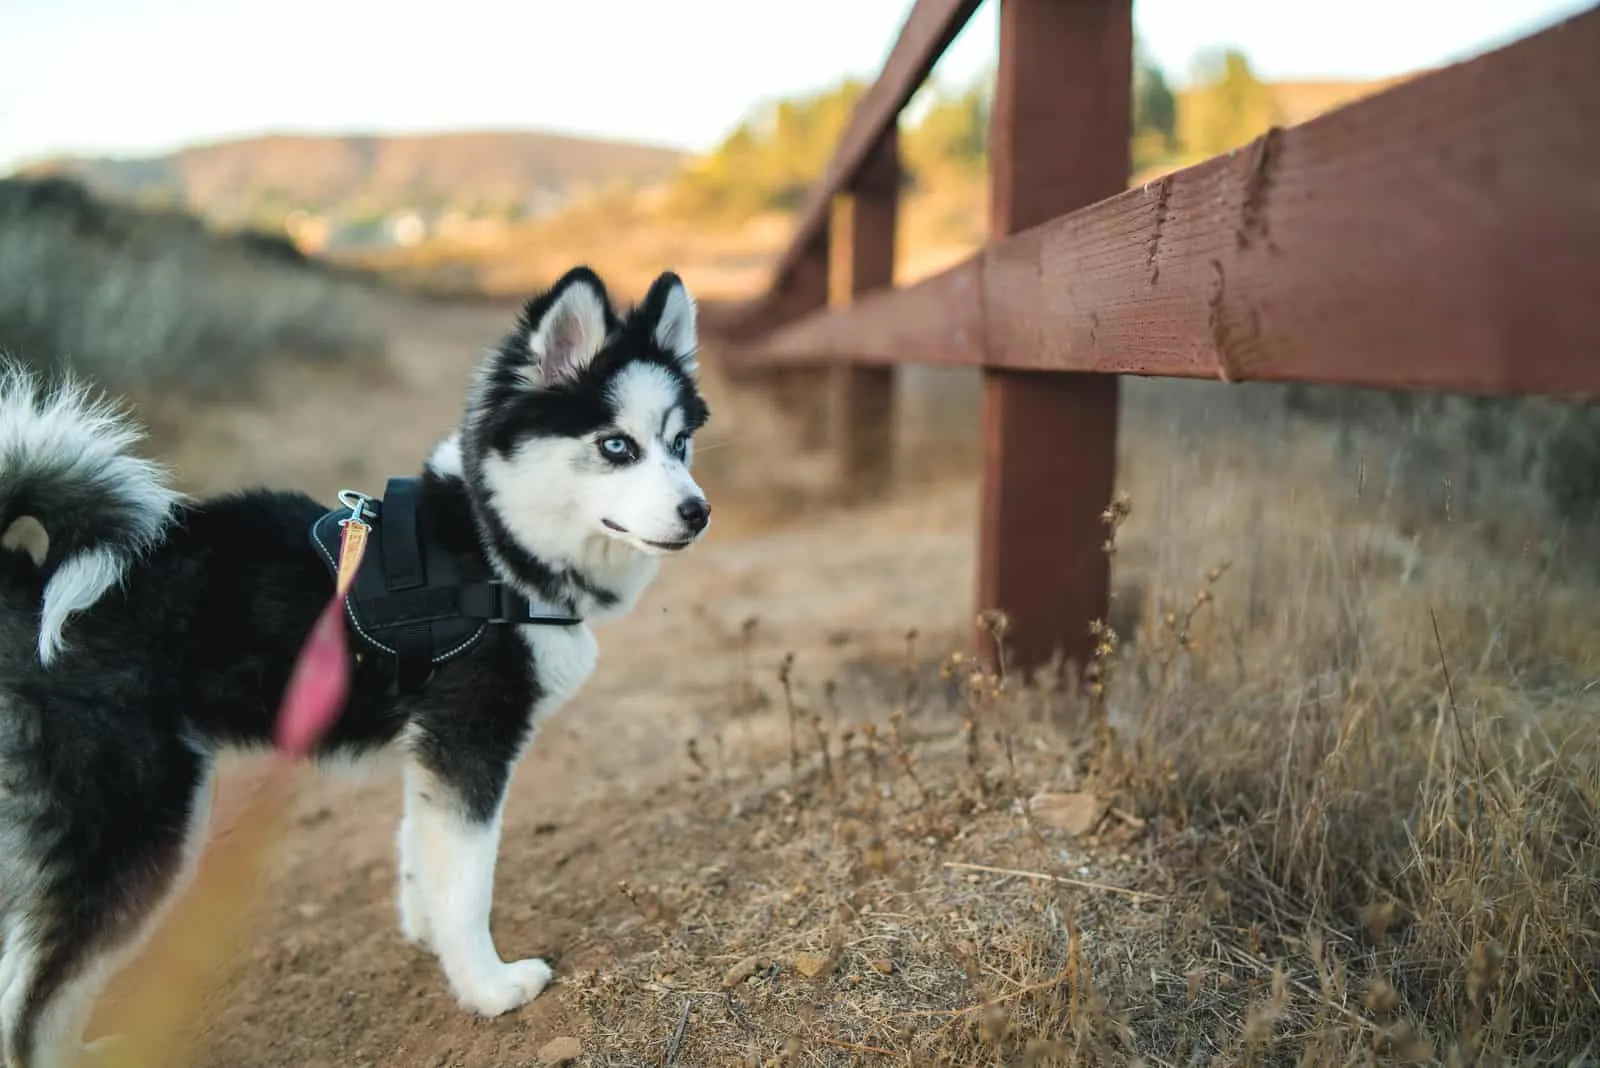 a pomsky dog on a leash stands by the fence and watches something